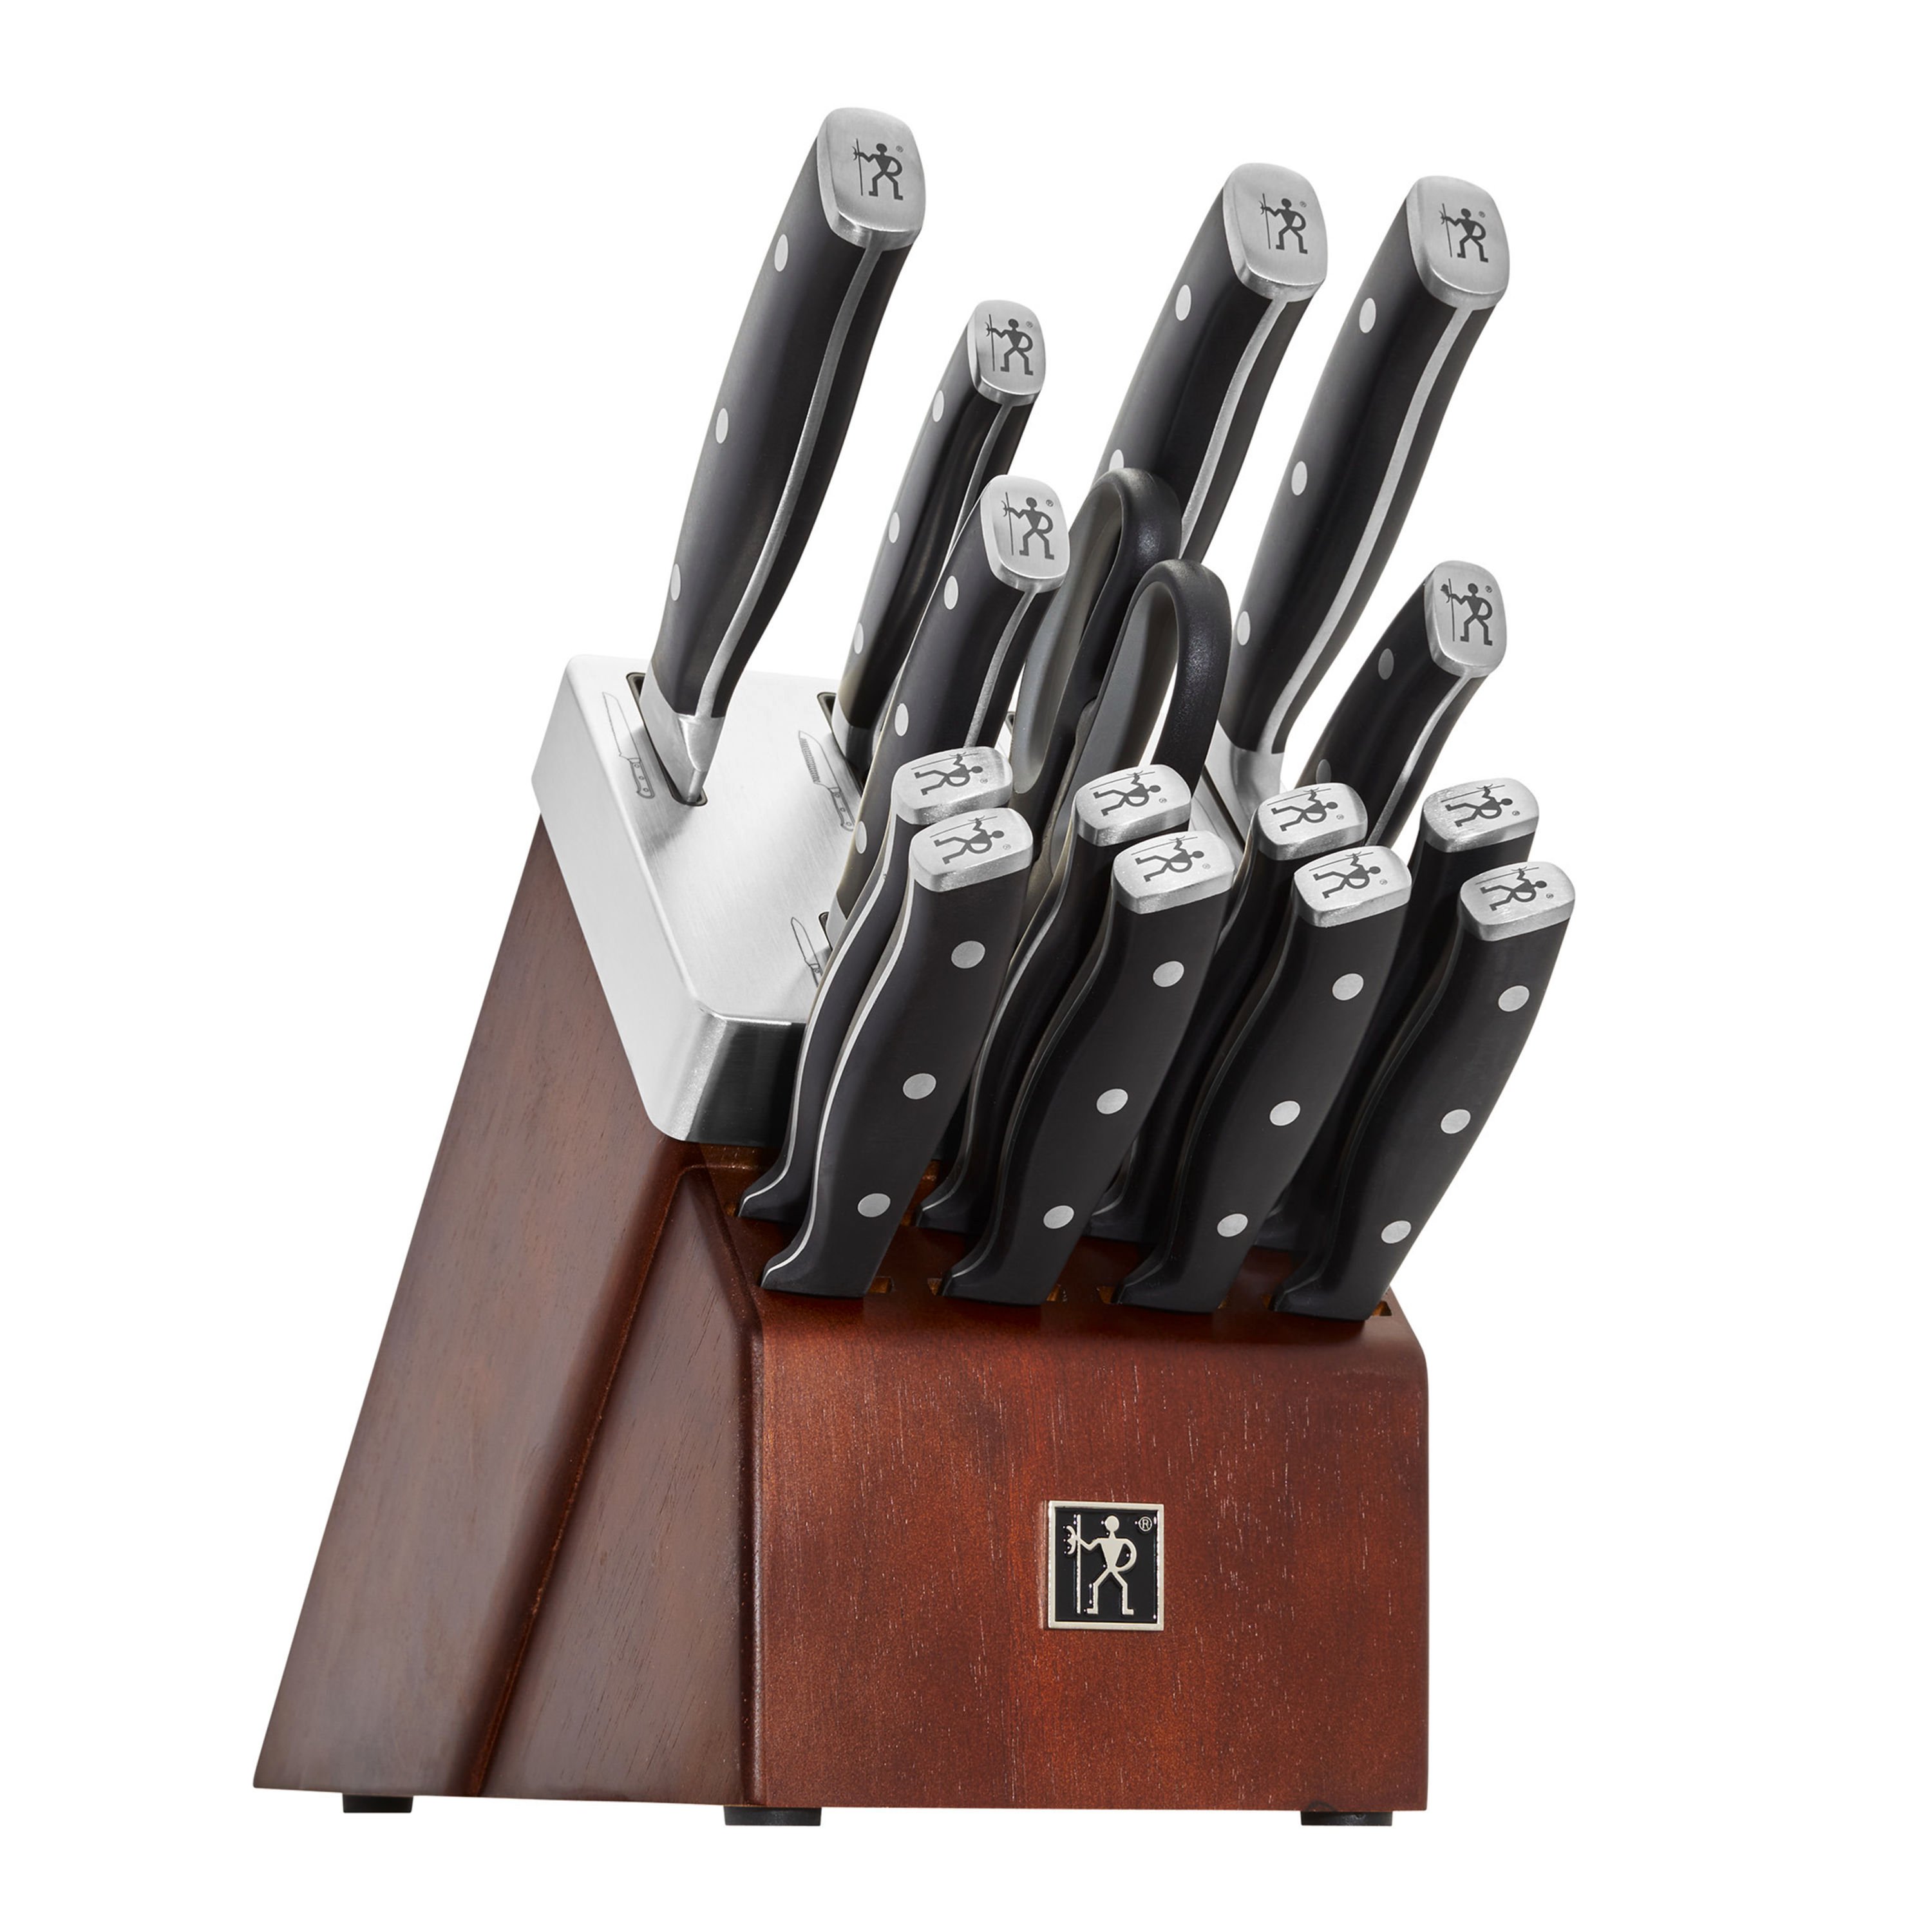 Henckels Forged Accent 15-pc, Knife Block Set